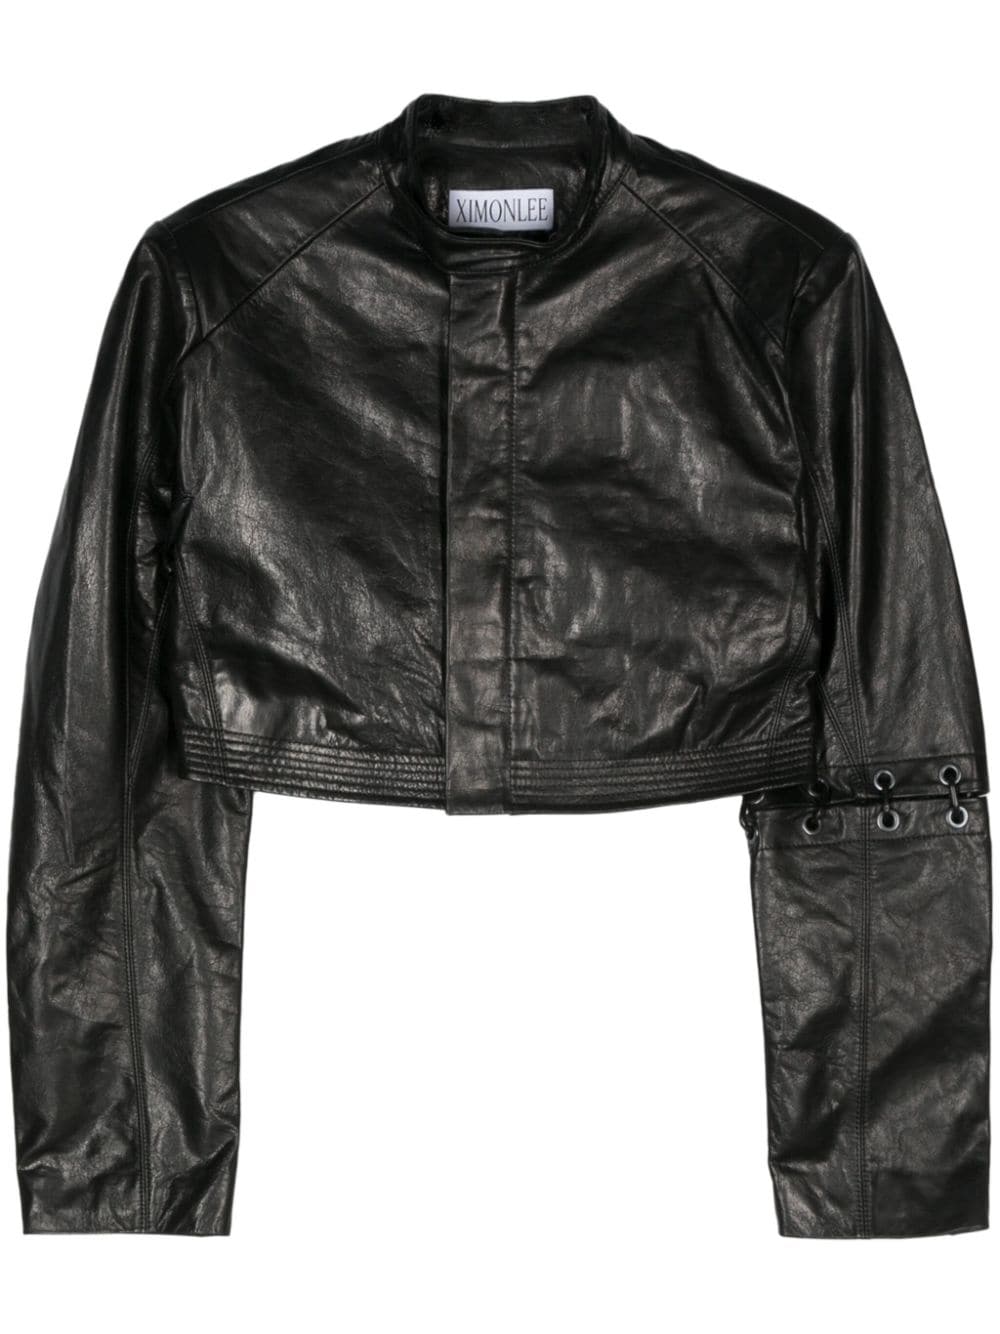 Ximon Lee Cropped Leather Jacket In Black